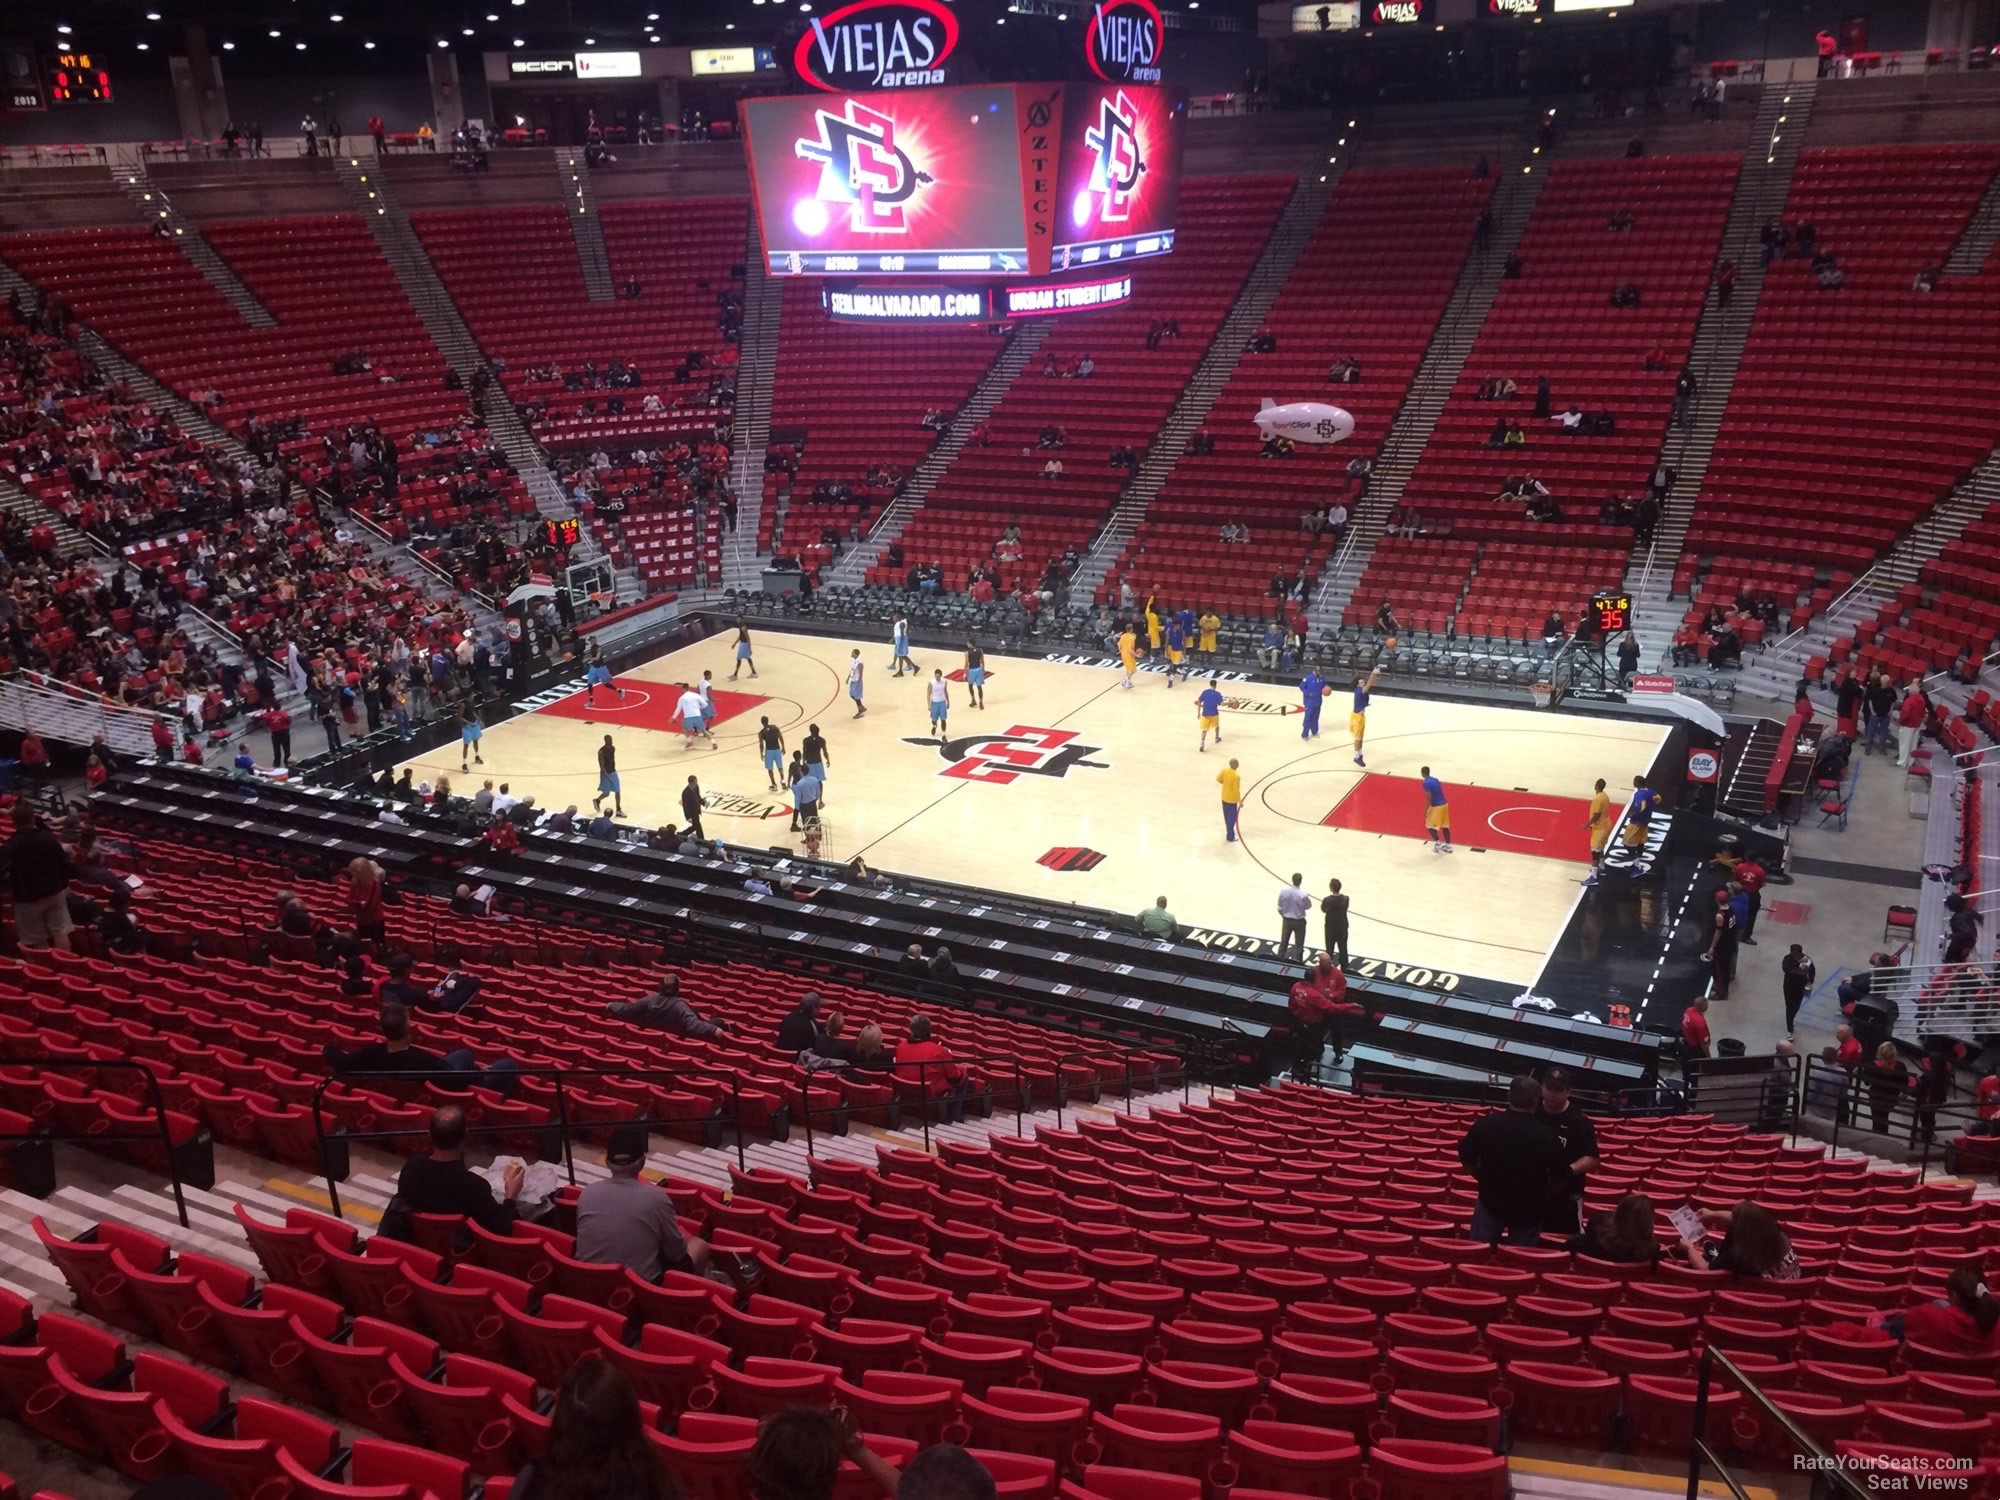 section t, row 30 seat view  - viejas arena